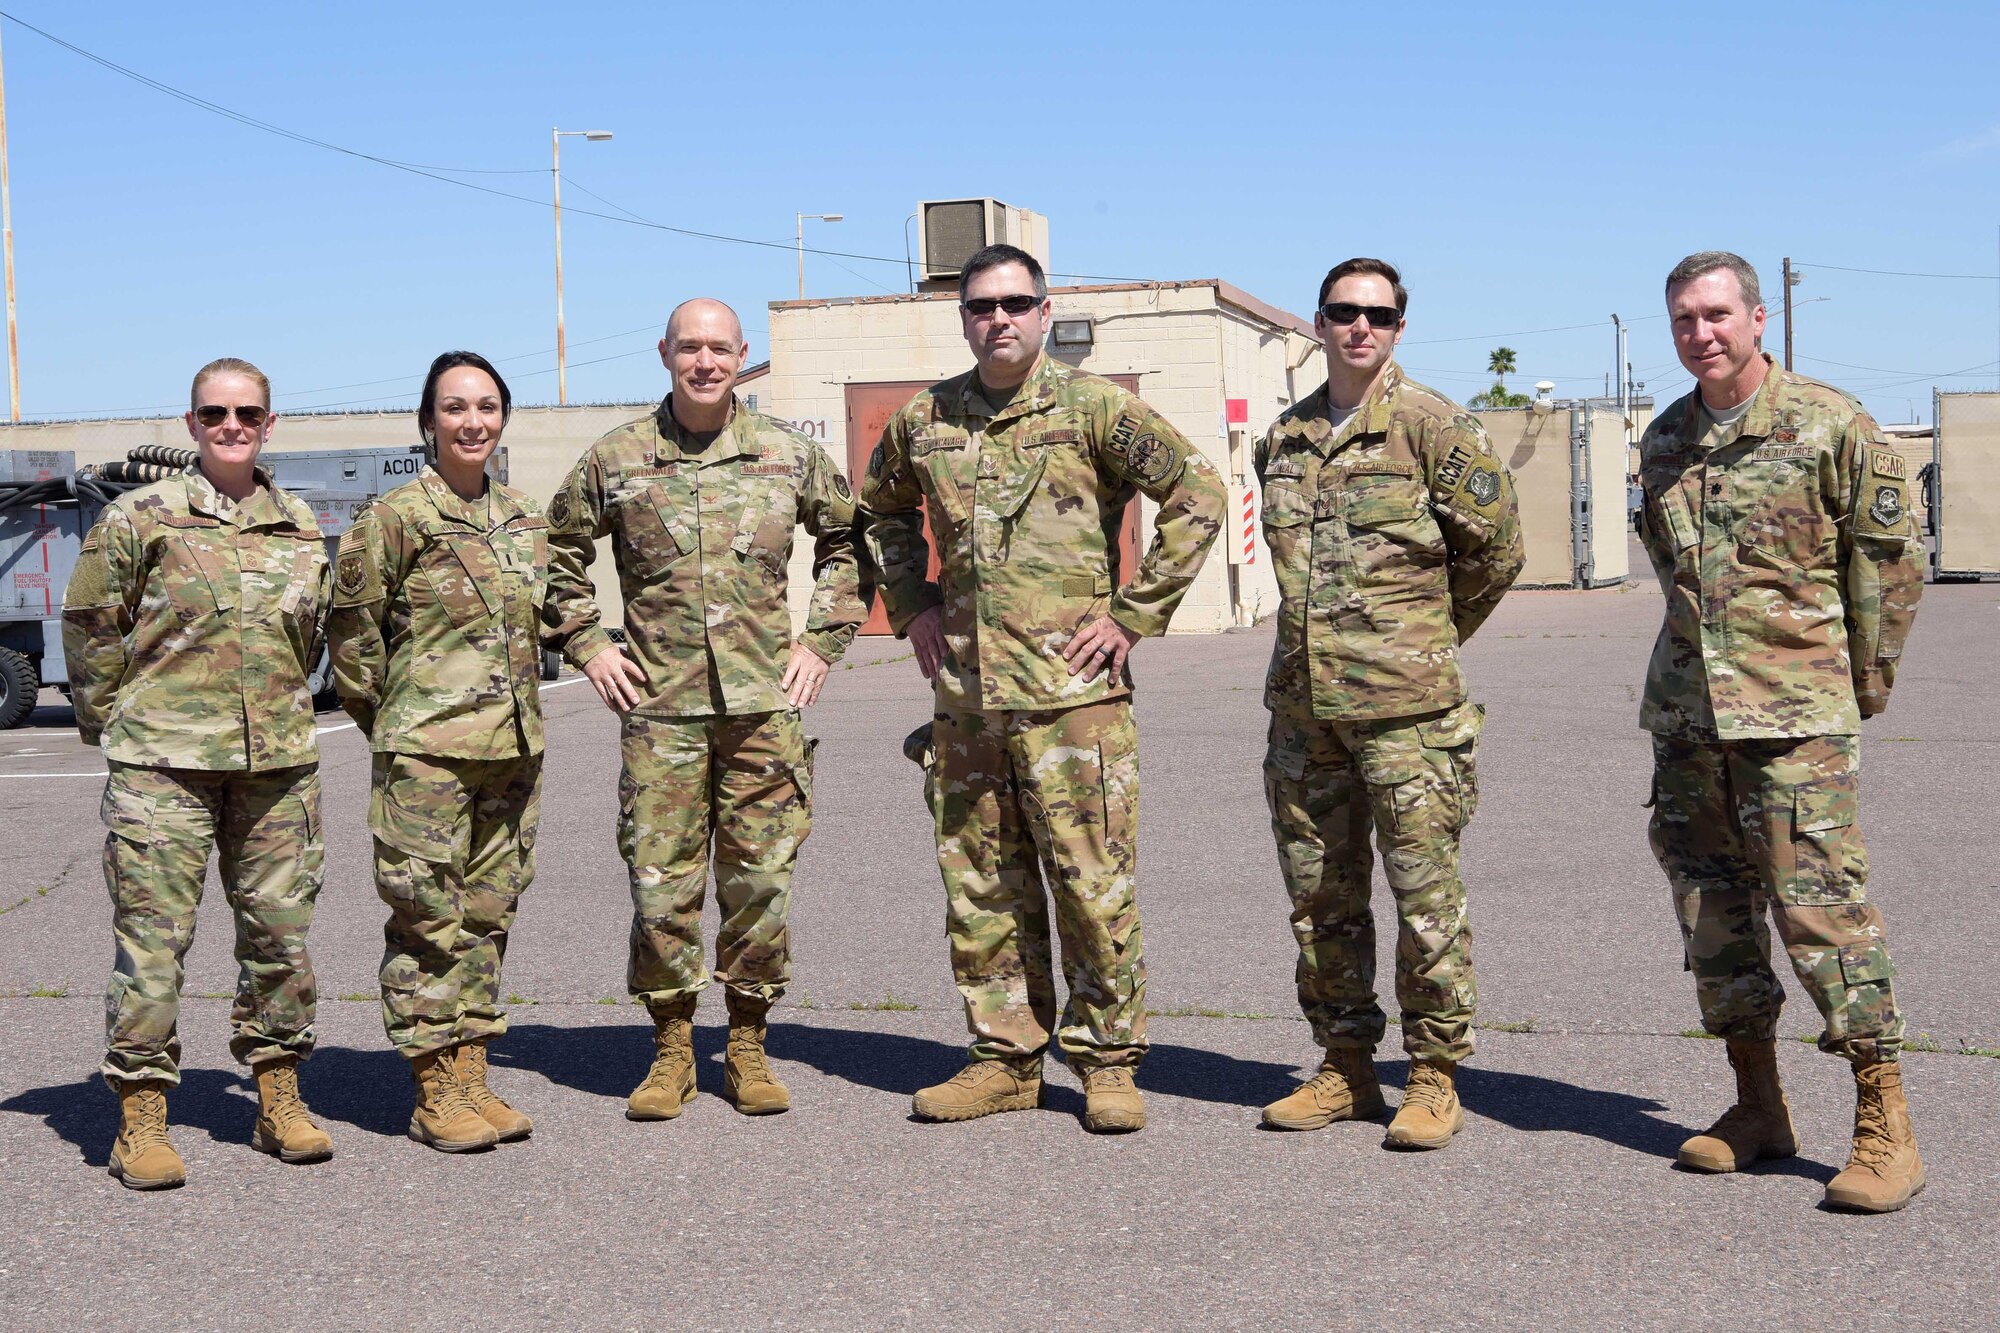 Mobilized Air Force Reserve medics pose for a photo with their leaderships before they board their airlift in support of the COVID-19 pandemic at Luke Air Force Base, Ariz., April 5, 2020. This deployment is part of a larger mobilization package of more than 120 doctors, nurses and respiratory technicians Air Force Reserve units across the nation provided over the past 48 hours in support of the COVID-19 response to take care of Americans.